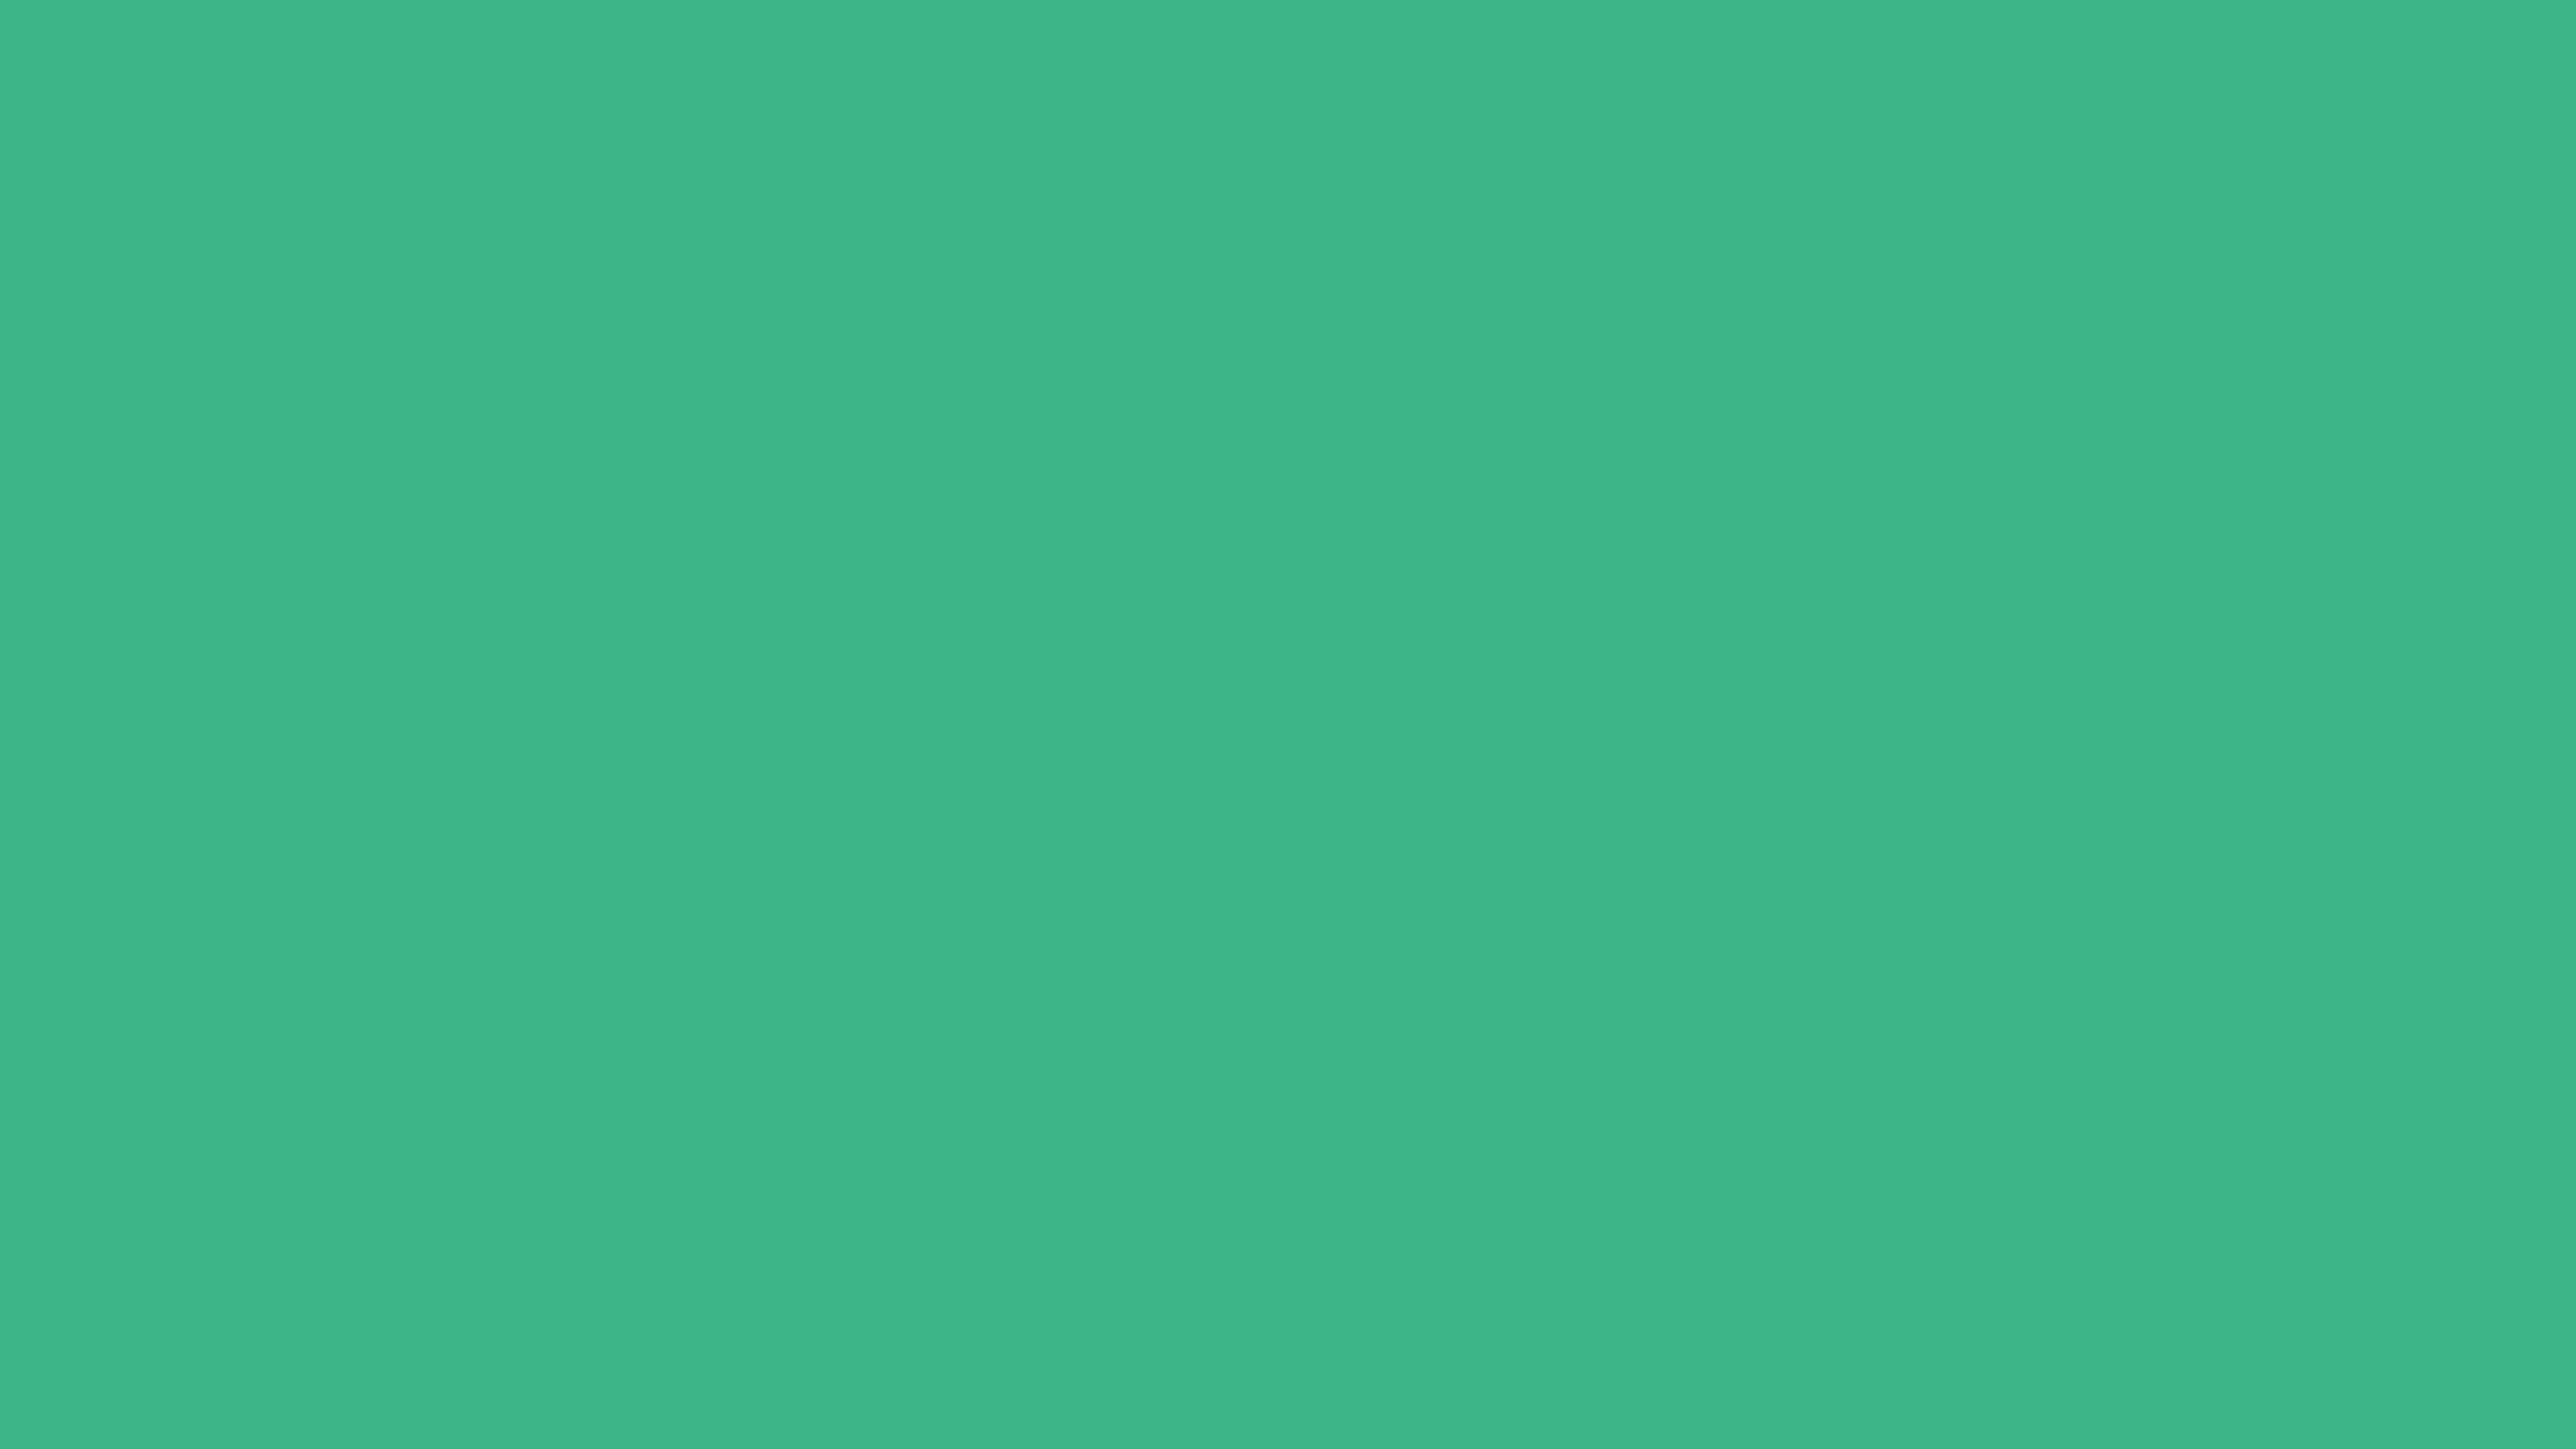 4096x2304 Mint Solid Color Background